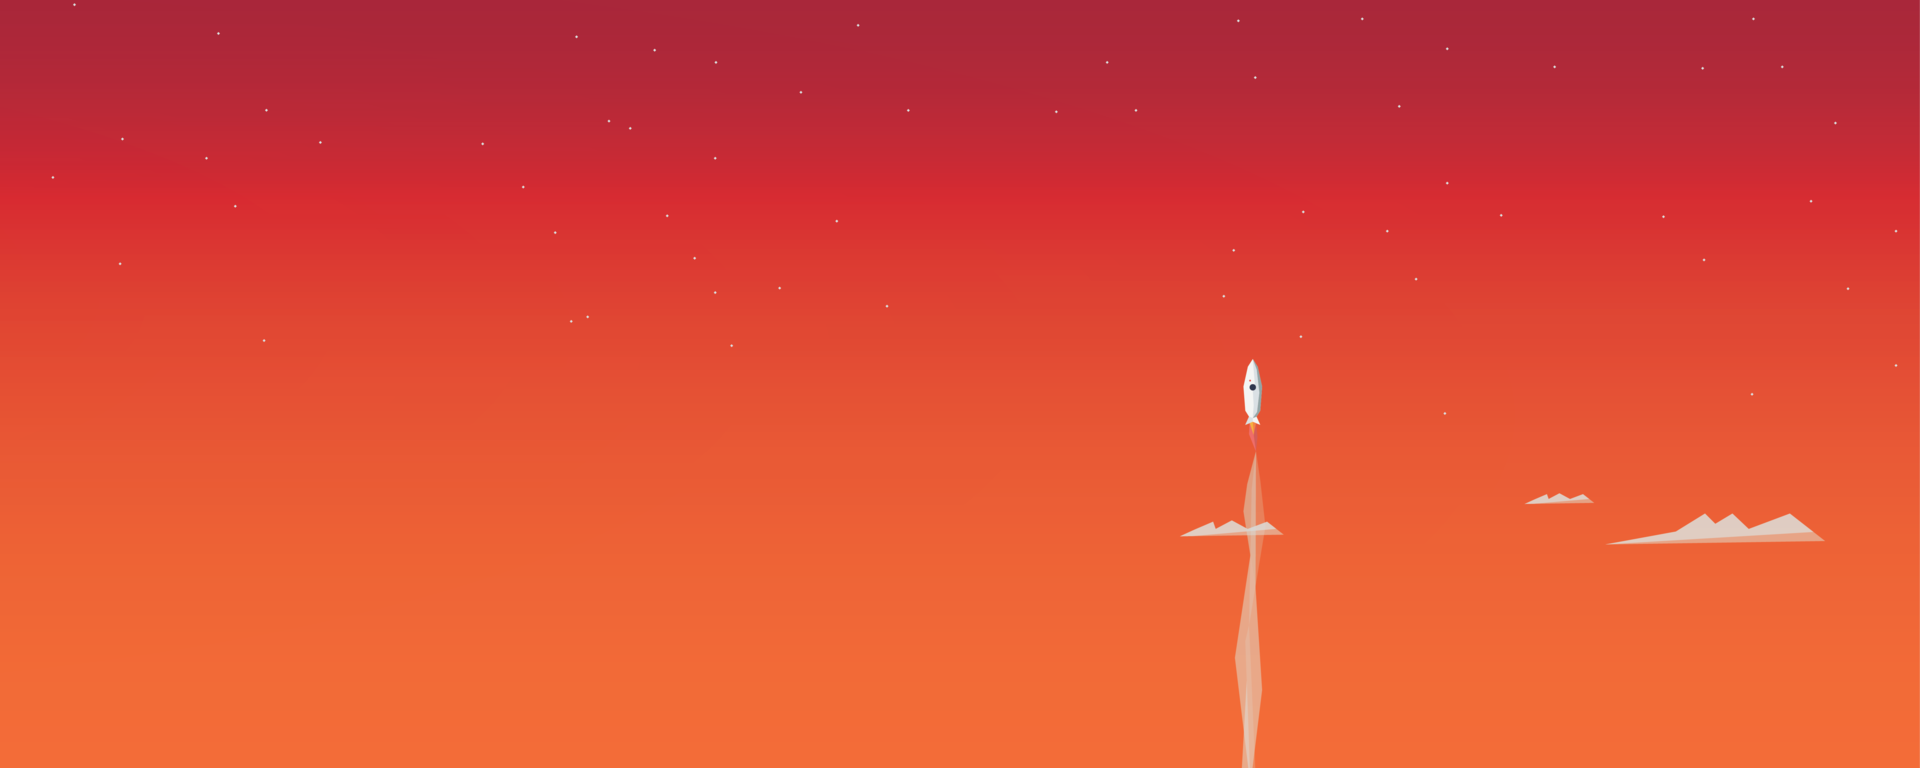 Rocket ship flying upwards, in front of a red sky with stars and clouds.